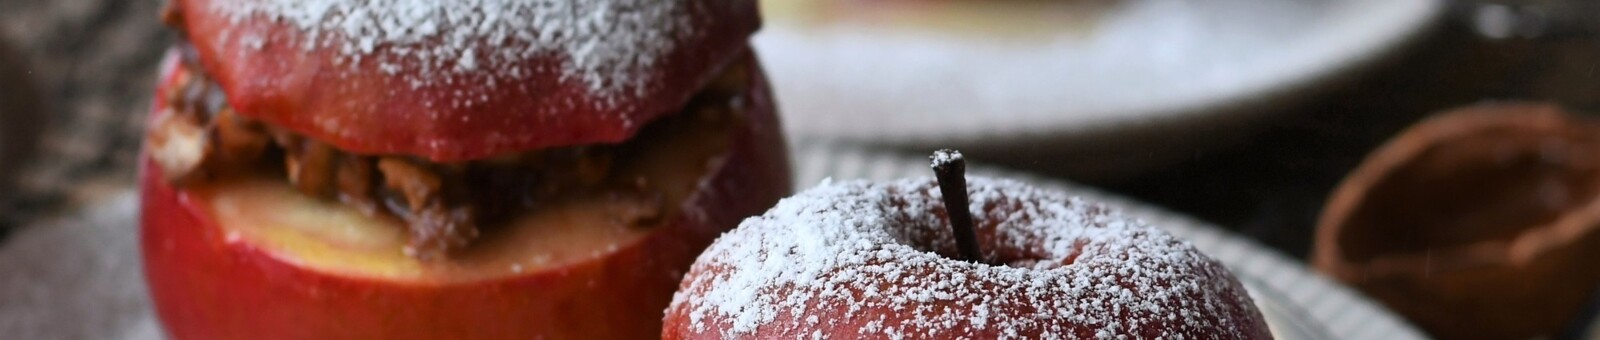     Culinary delights in winter, Baked apples 